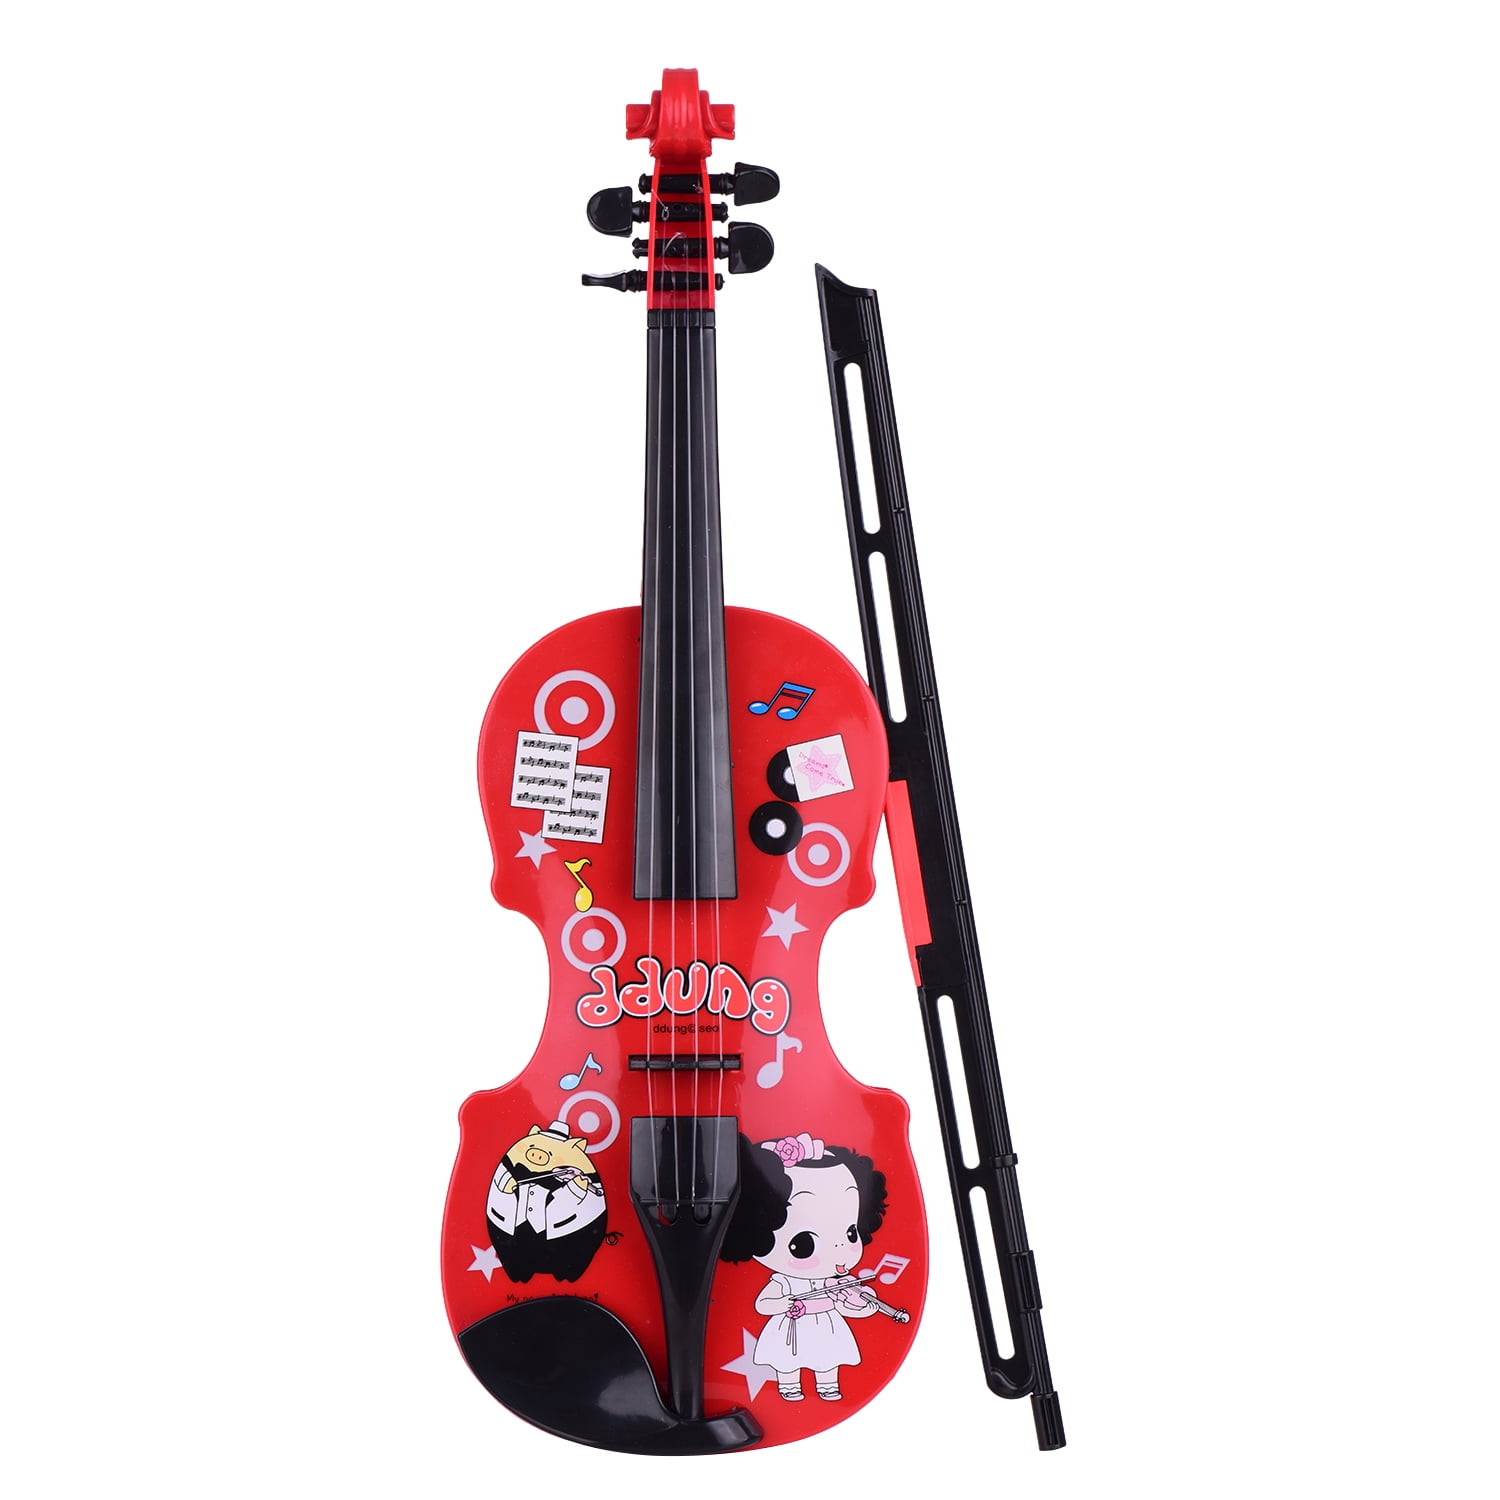 moobody Kids Little Violin with Violin Bow Fun Educational Musical